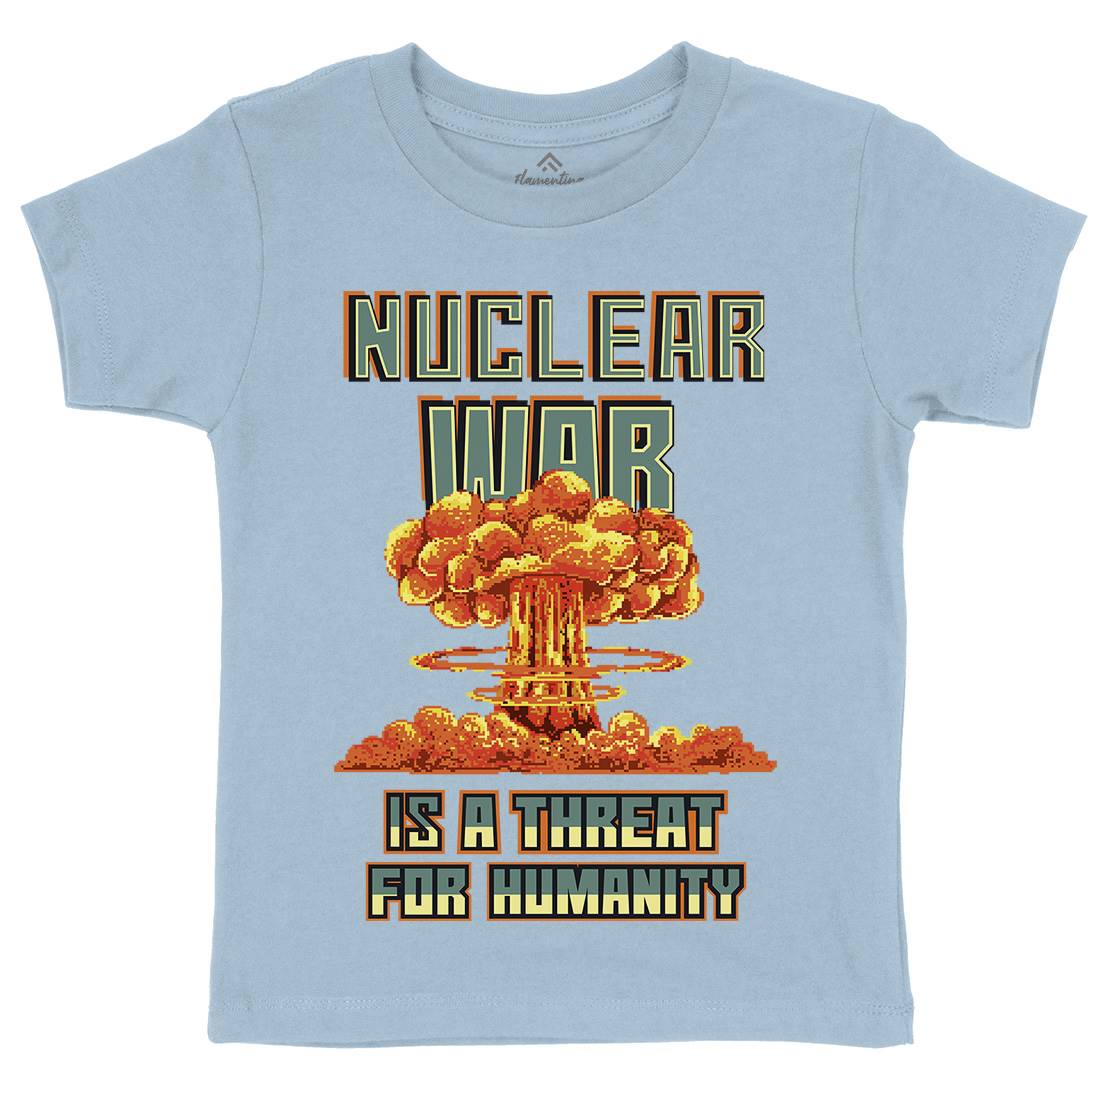 Nuclear War Is A Threat For Humanity Kids Crew Neck T-Shirt Army B941